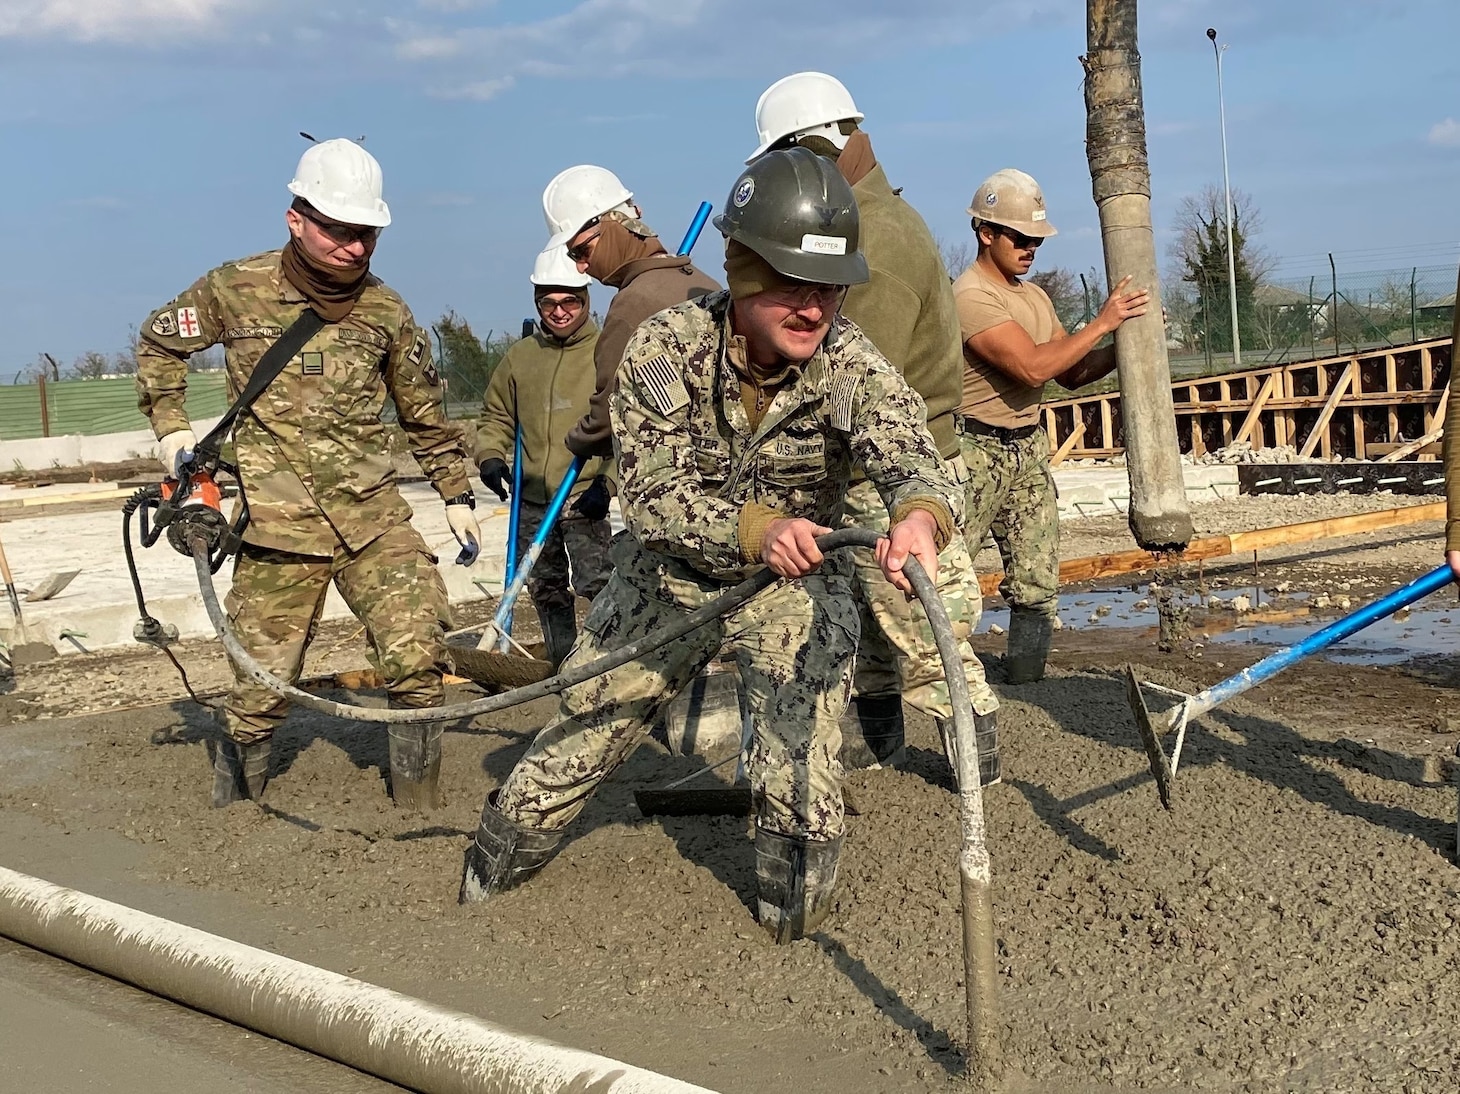 221215-N-N0748-1083 POTI, Georgia (Dec. 15, 2022) Builder 2nd Class Ian Potter, assigned to Naval Mobile Construction Battalion (NMCB) 11, works with a soldier assigned to the Georgian Land Force’s 2nd Brigade Engineering Company to vibrate and strengthen the concrete pad for the Railhead Project in Poti, Georgia, Dec. 15, 2022. NMCB 11 operates as a part of Navy Expeditionary Combat Command and is assigned to Commander, Task Force 68 for deployment across the U.S. Naval Forces Europe-Africa area of operations to defend U.S., allied, and partner interests. (U.S. Navy photo by Builder Constructionman Gabriella Coupe)